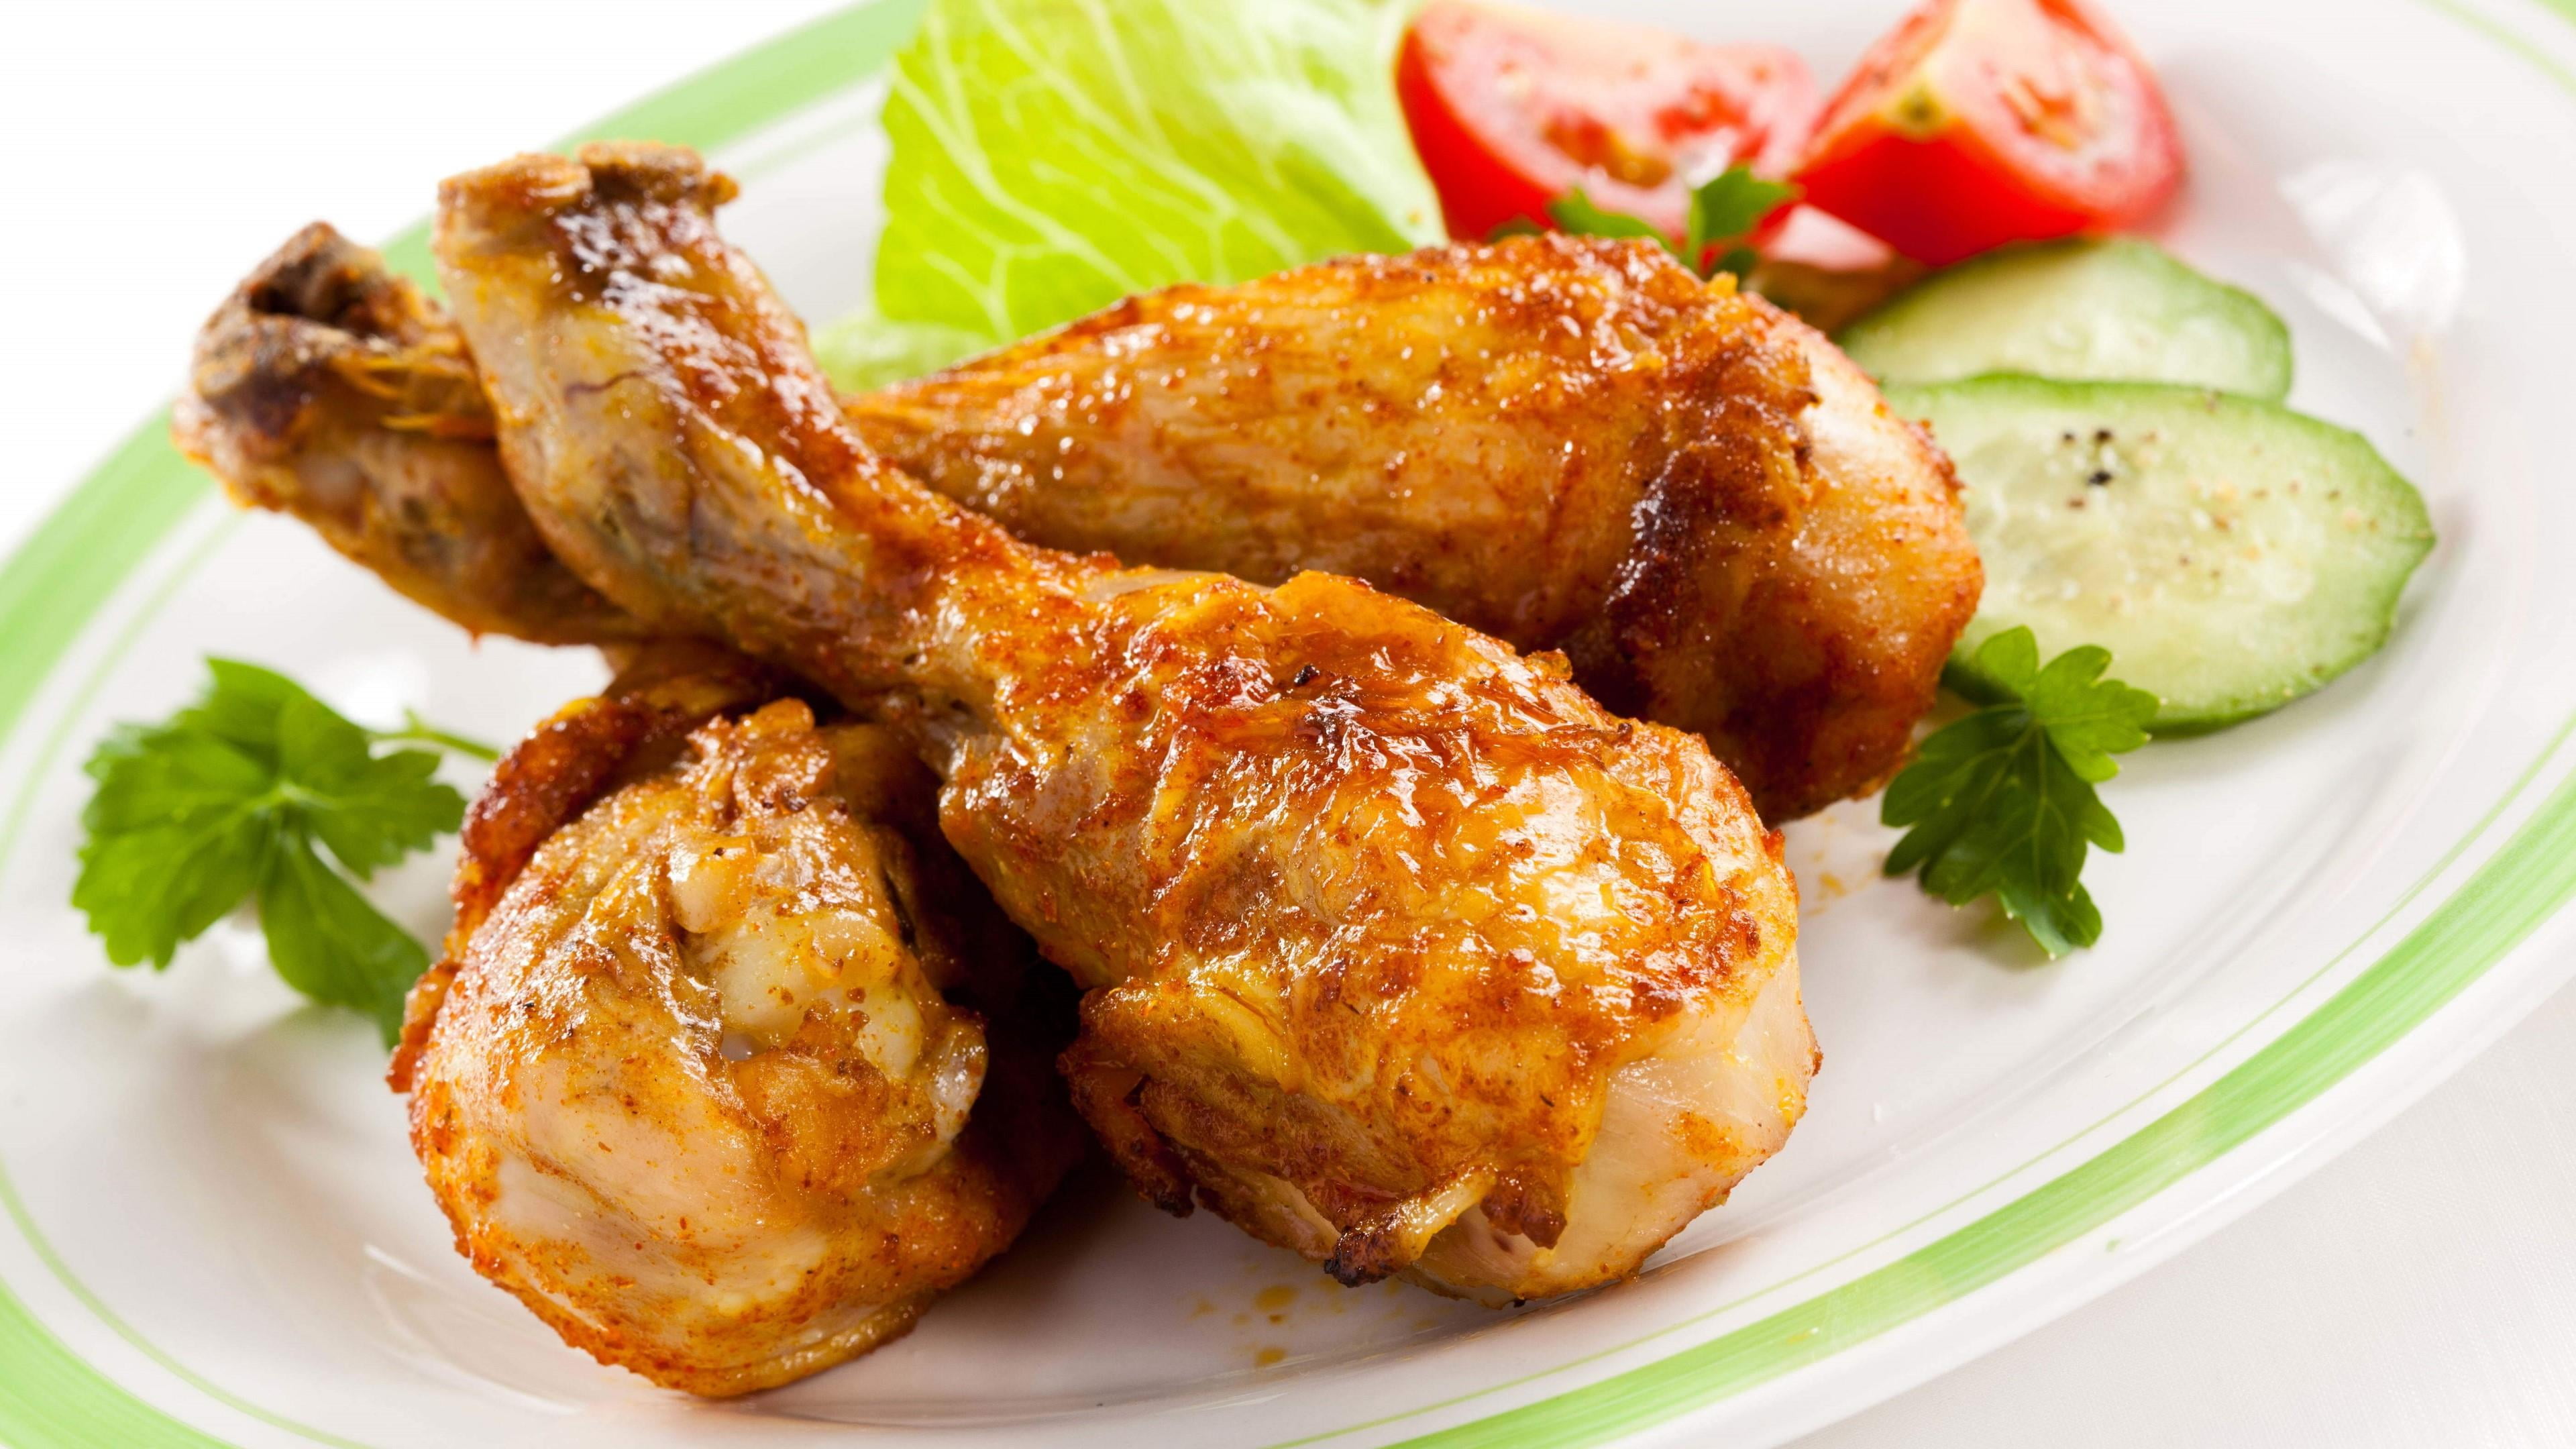 chicken legs, food, meat, food and drink, chicken meat, ready-to-eat